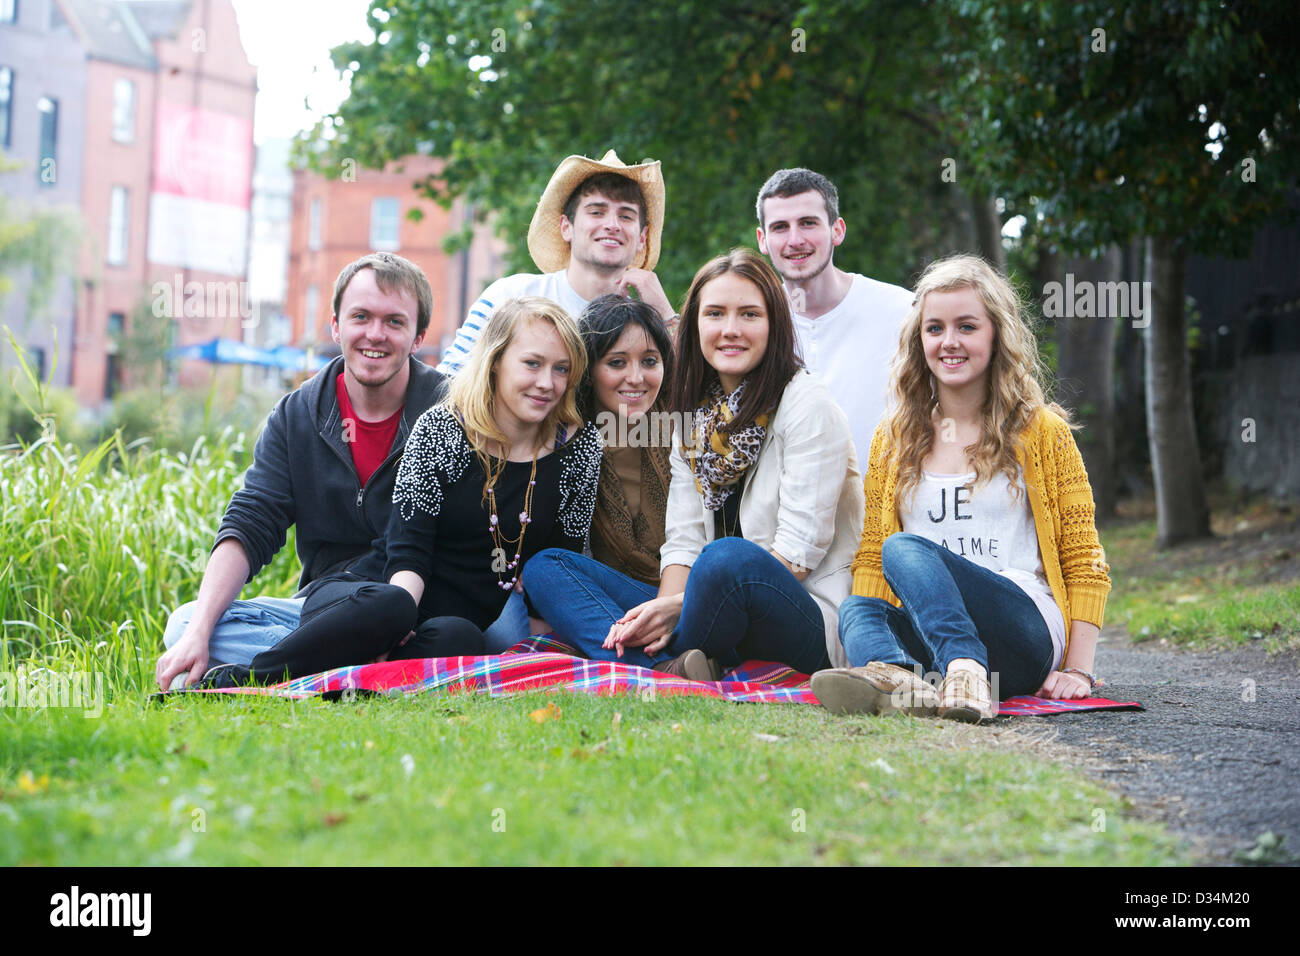 A group of young boys and girls sitting on picnic rug. Stock Photo